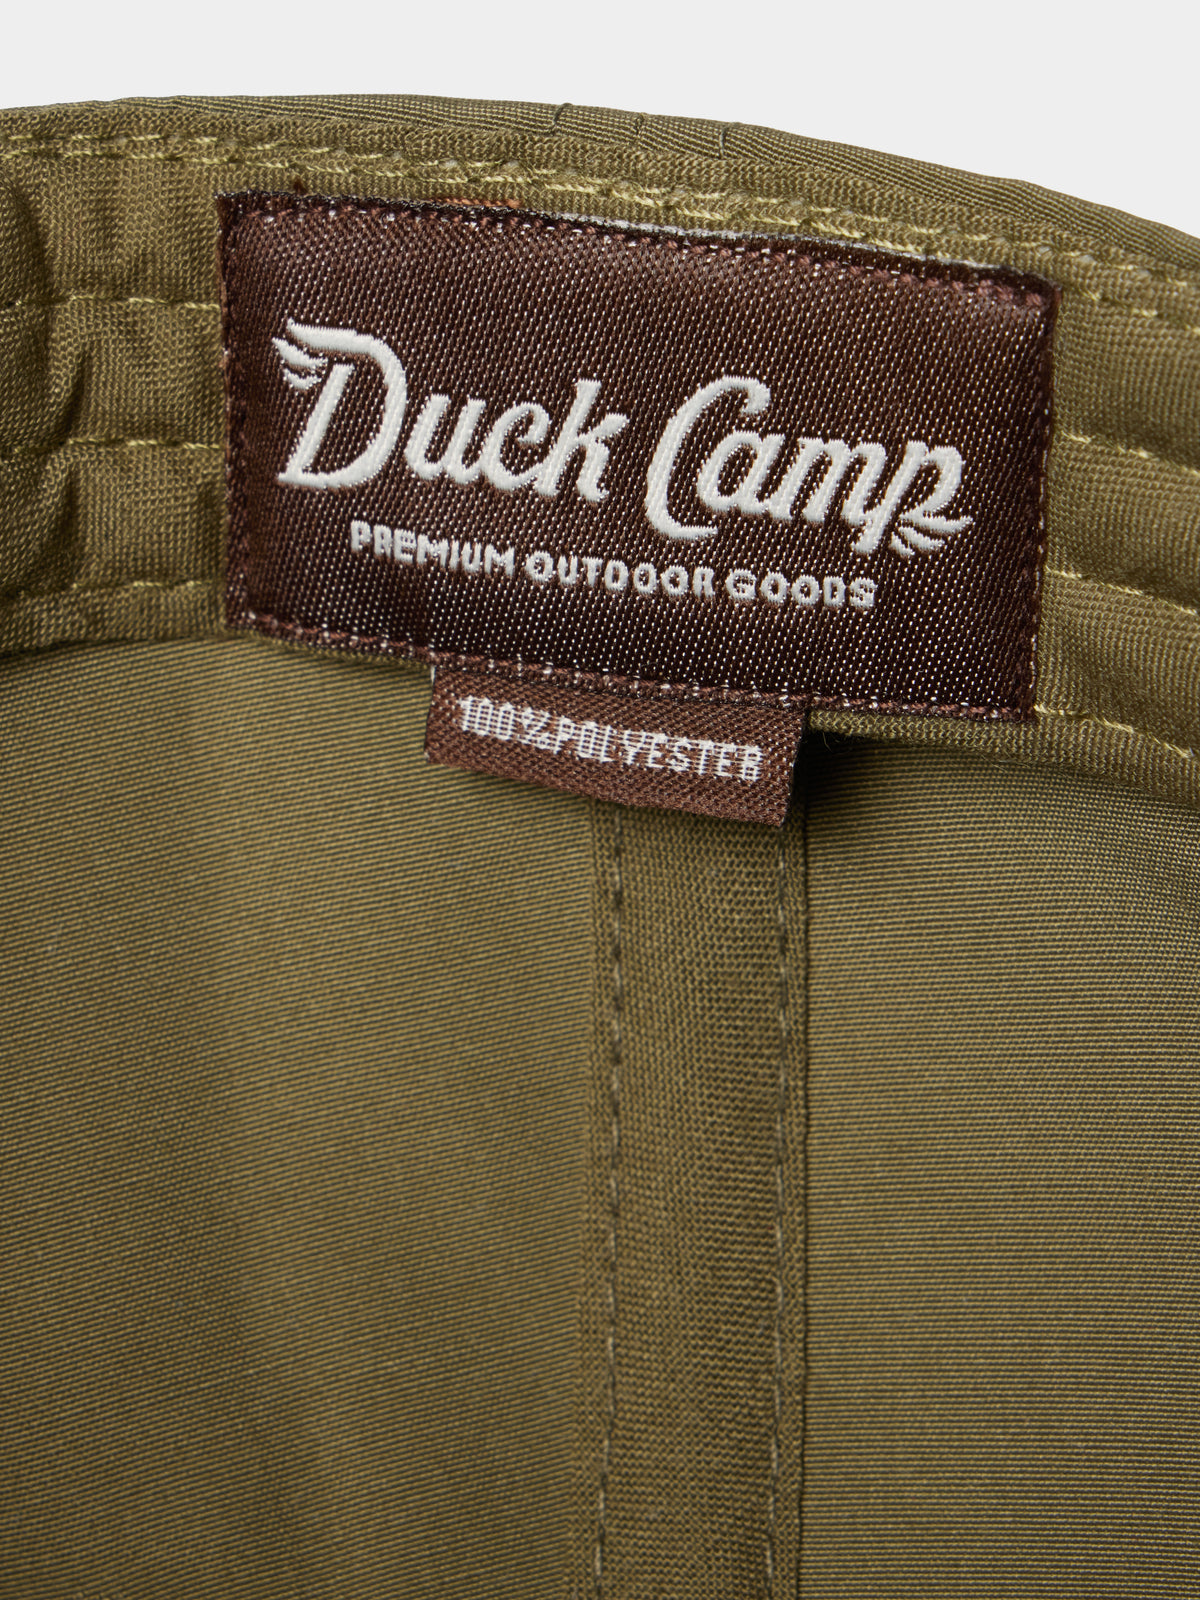 Turkey Hat - Dusty Olive – Duck Camp